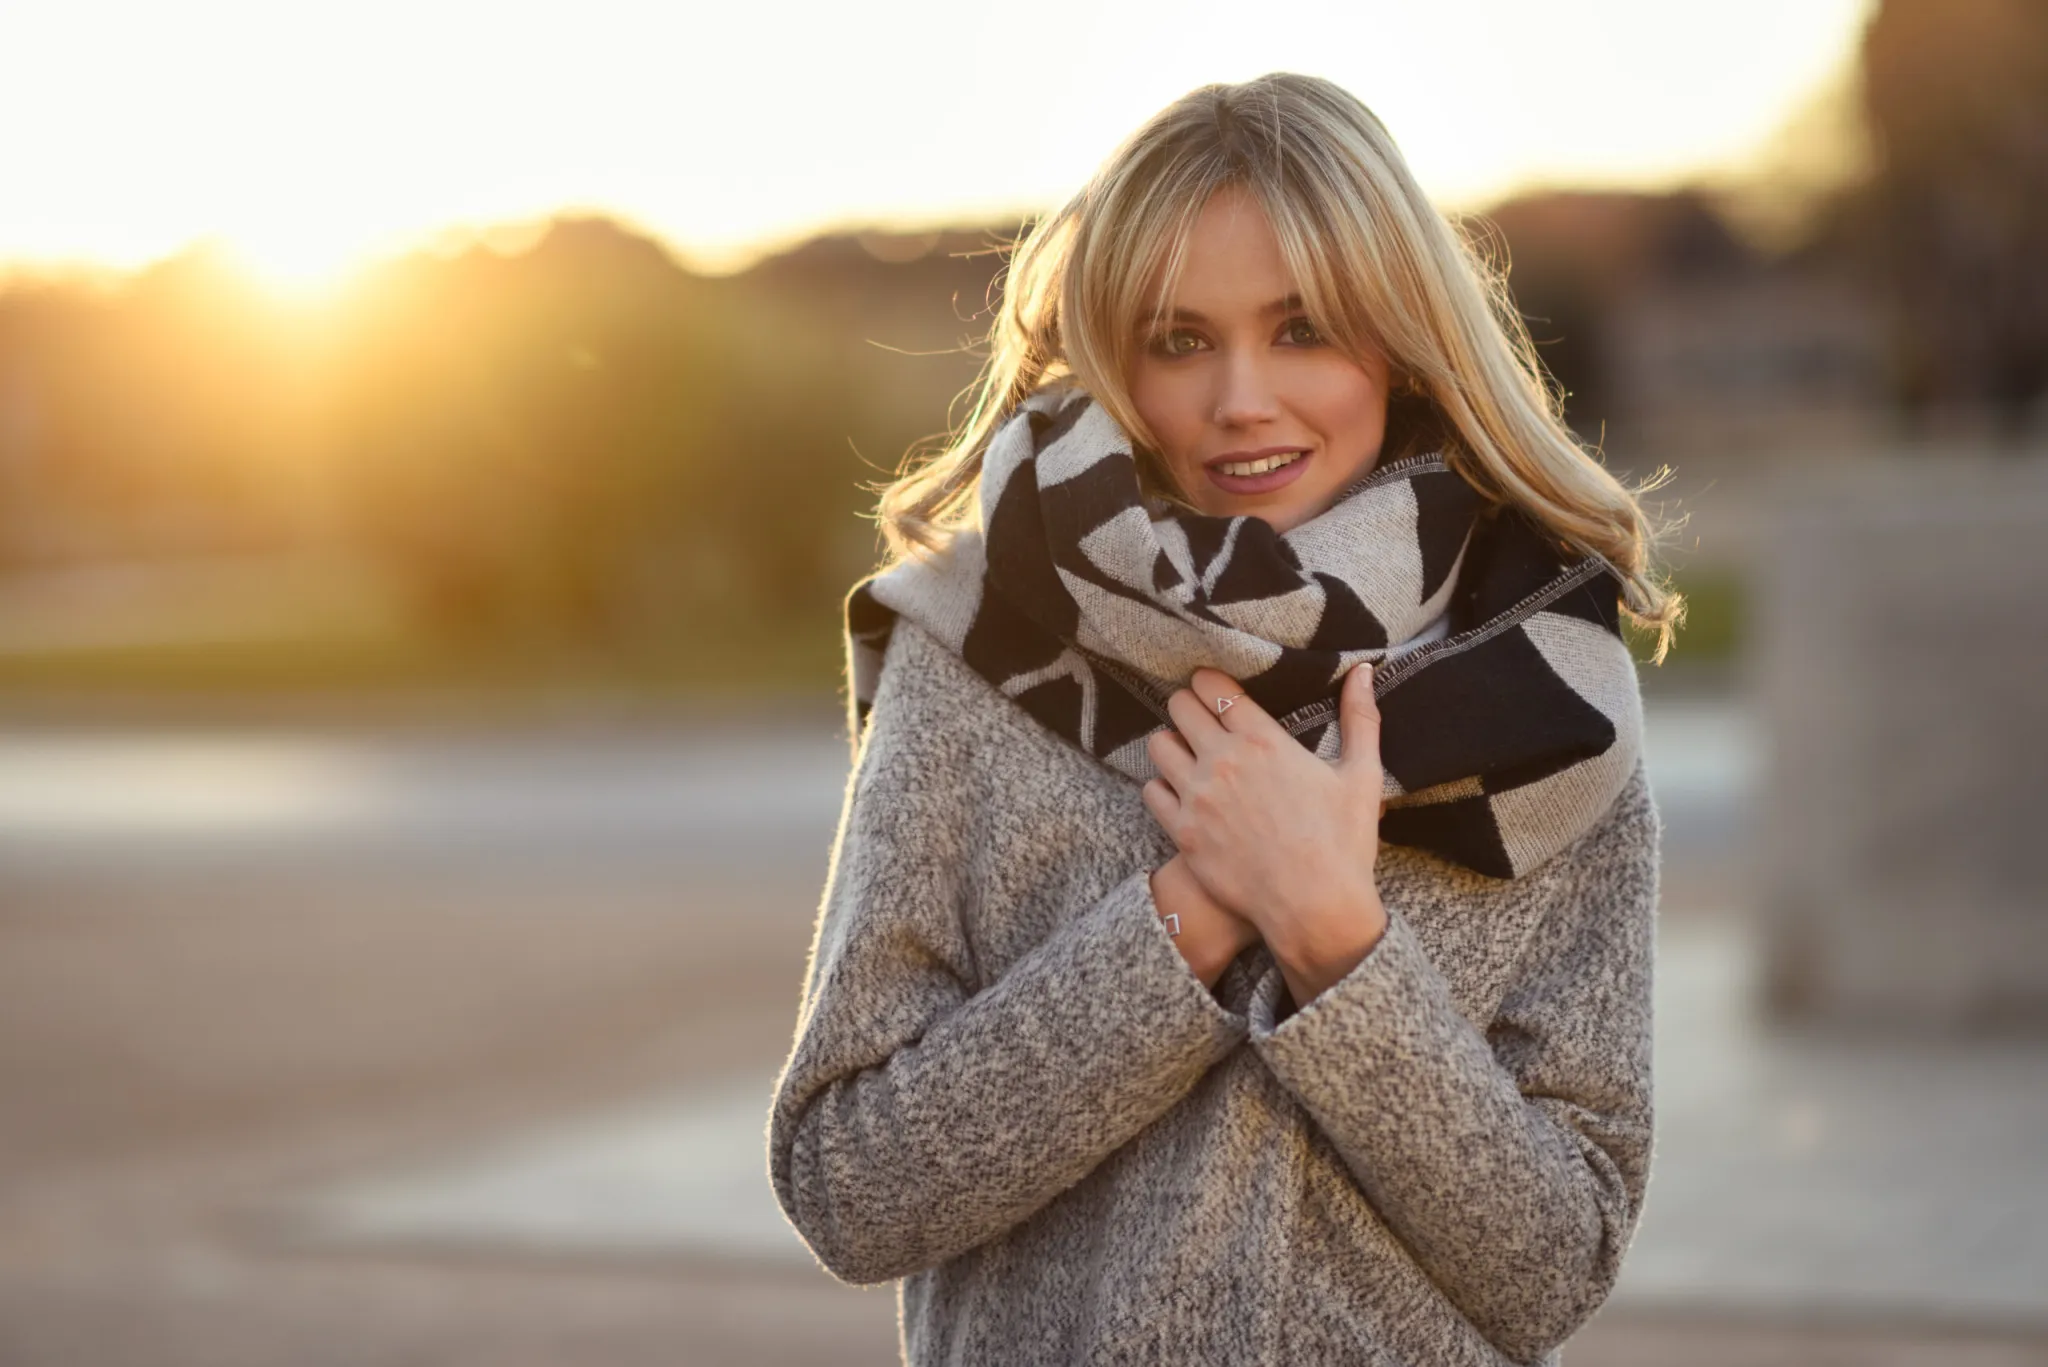 Beautiful young blonde woman in urban background Attractive blonde woman in urban background with sun backlight Young girl wearing winter coat and scarf standing in the street Pretty female with straight hair hairstyle and blue eyes | Walnut Creek Aesthetics in Walnut Creek, CA